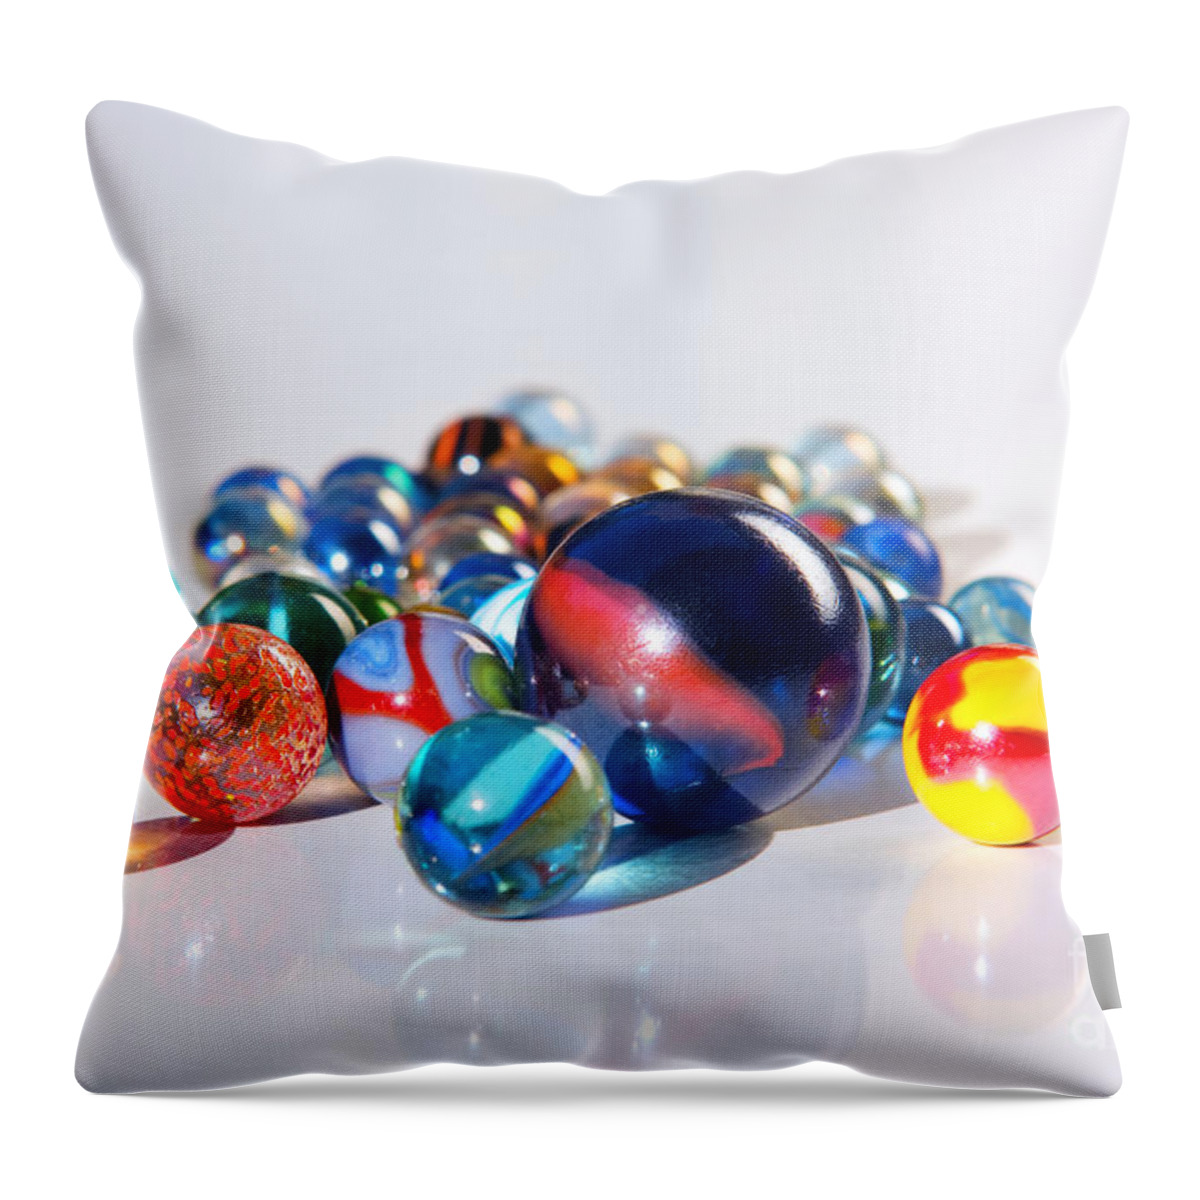 Abstract Throw Pillow featuring the photograph Colorful Marbles #1 by Carlos Caetano